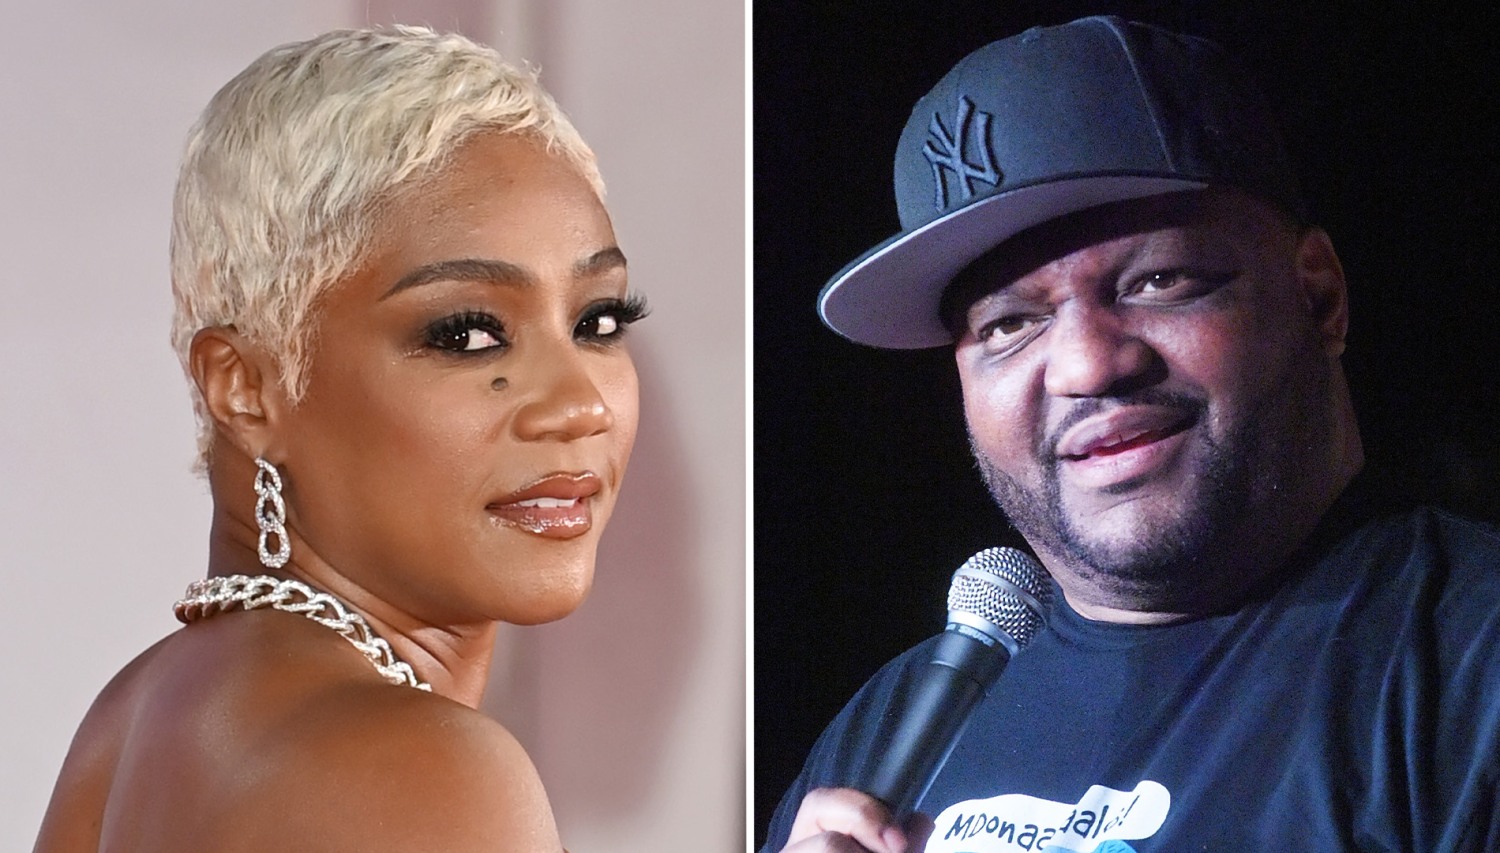 Tiffany Haddish and Aries Spears accused of grooming and molesting siblings in sexually explicit skits, lawsuit says